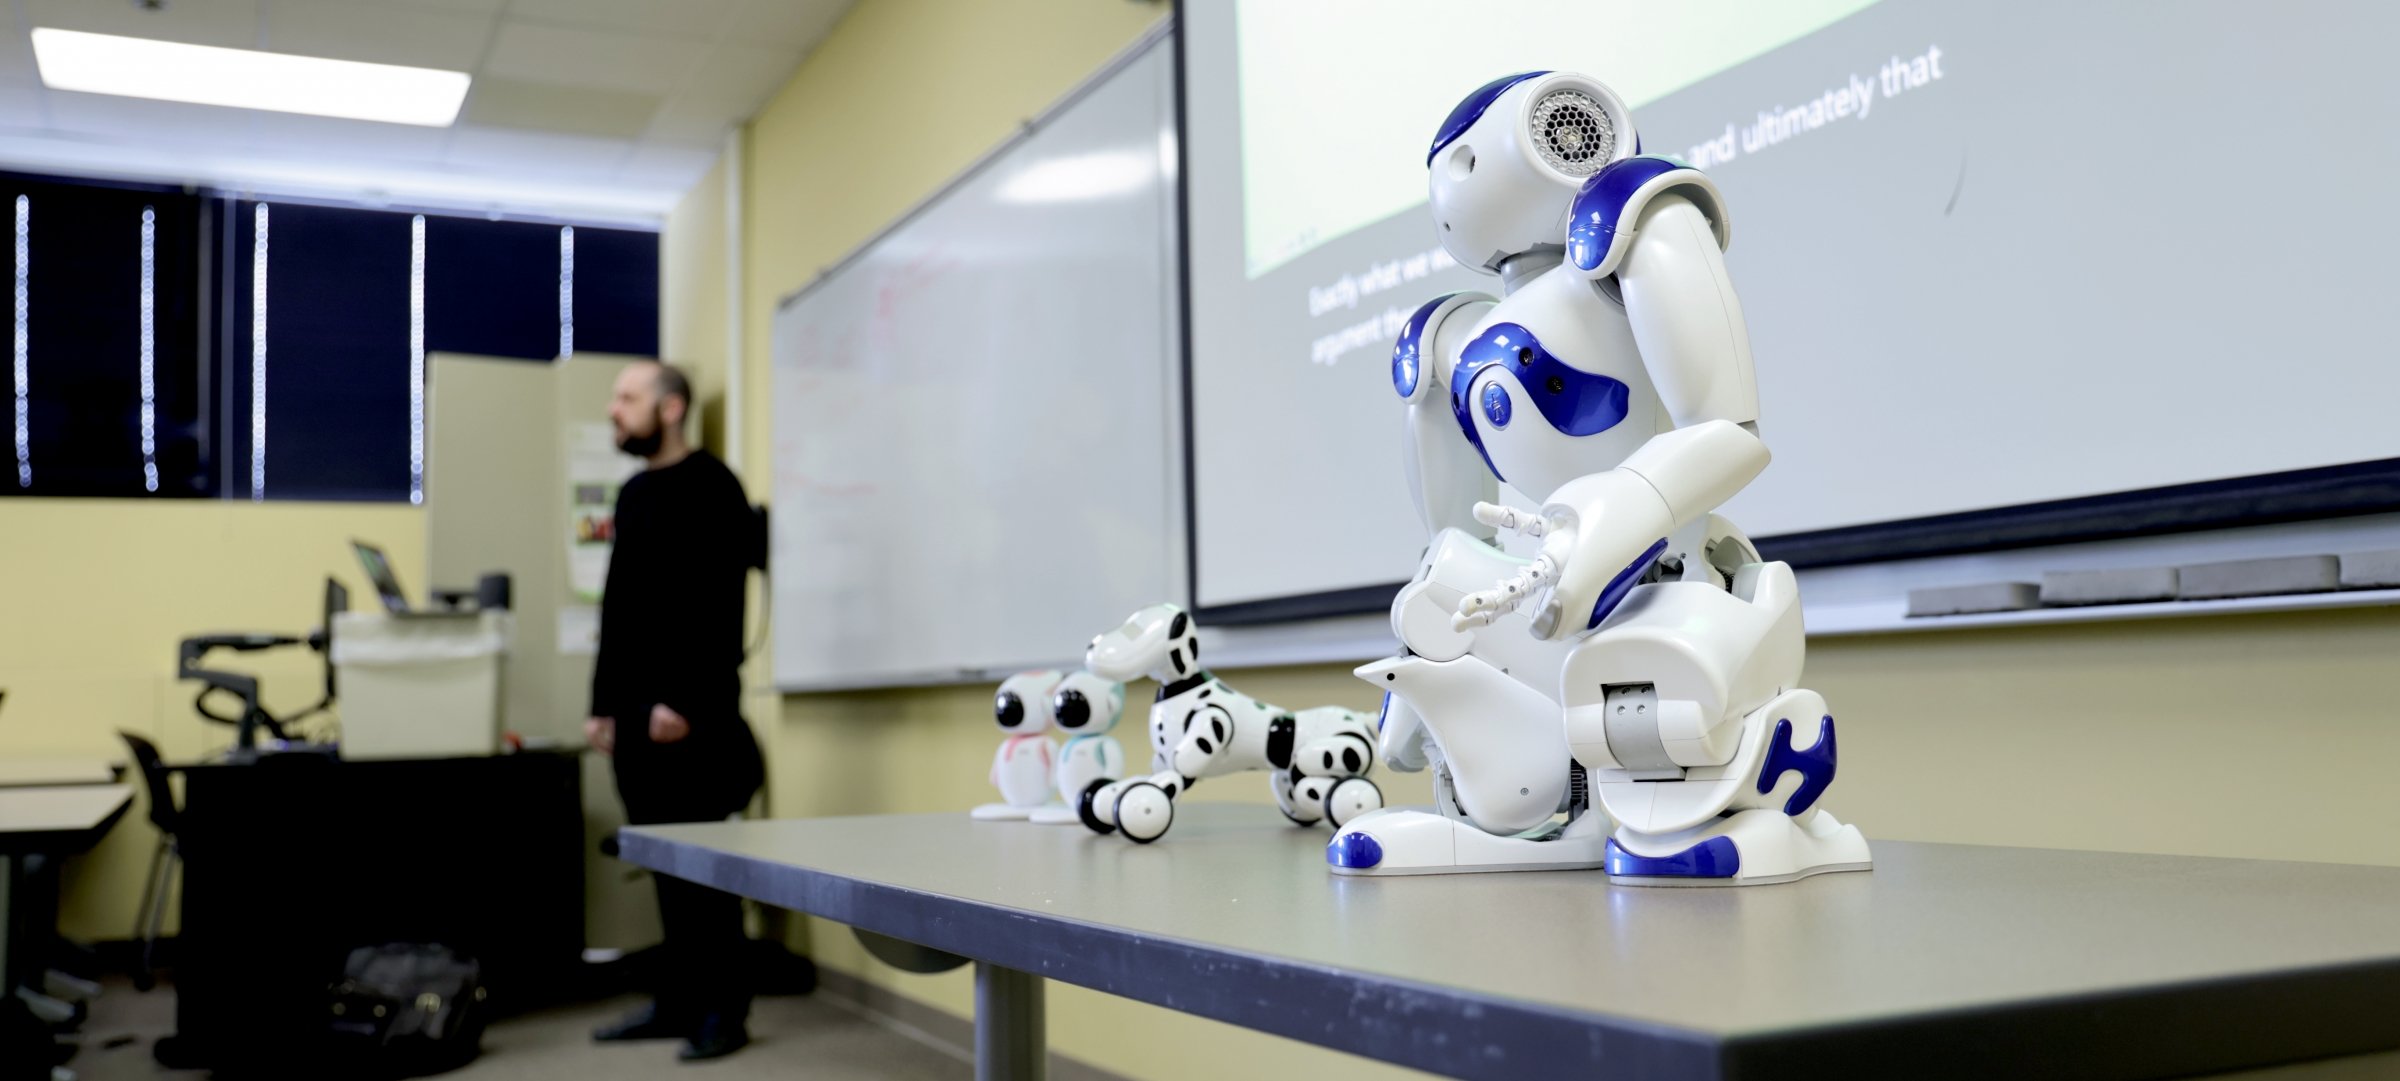 Four robots on a table in a classroom as a professor lectures in the background.